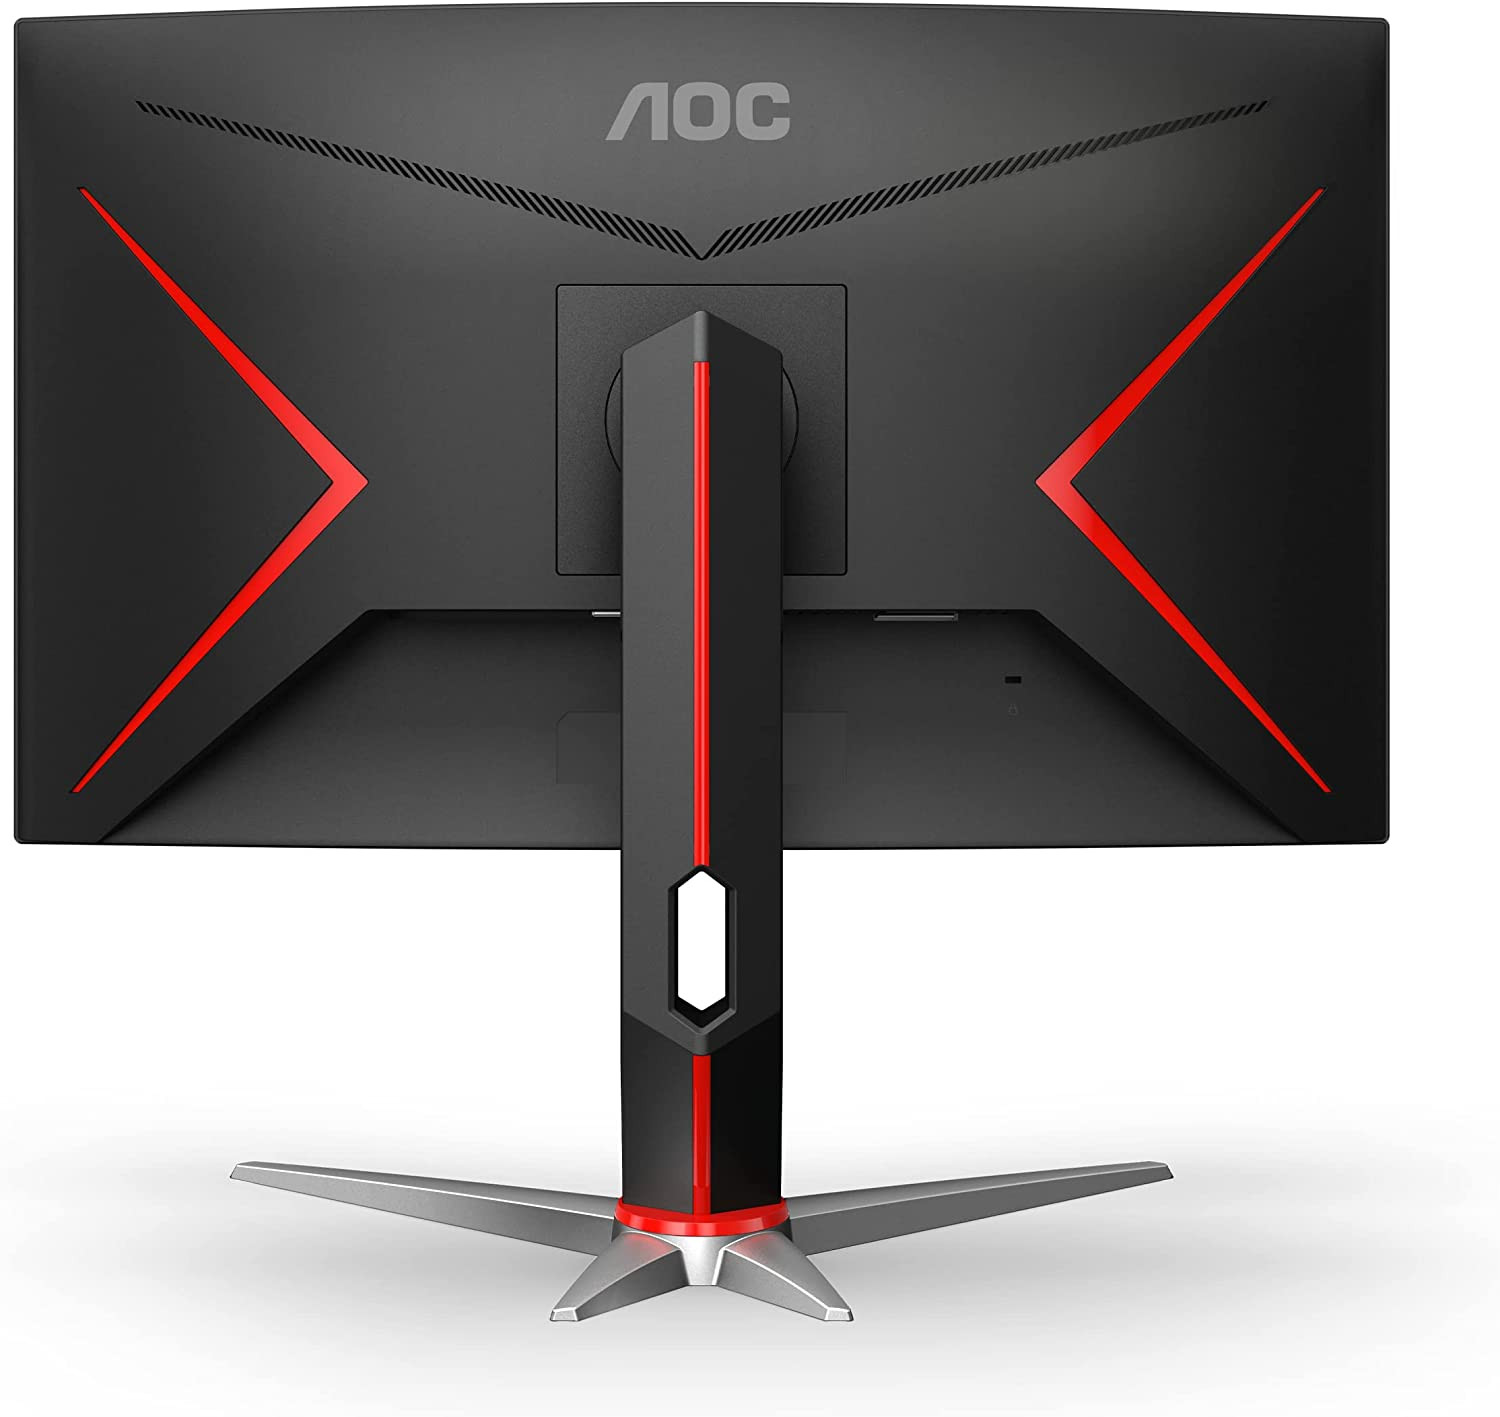 AOC C27G2Z 27" Curved Frameless Ultra-Fast Gaming Monitor, FHD 1080p, 0.5ms 240Hz, FreeSync, HDMI/DP/VGA, Height Adjustable, 3-Year Zero Dead Pixel Guarantee, Black, 27" FHD Curved